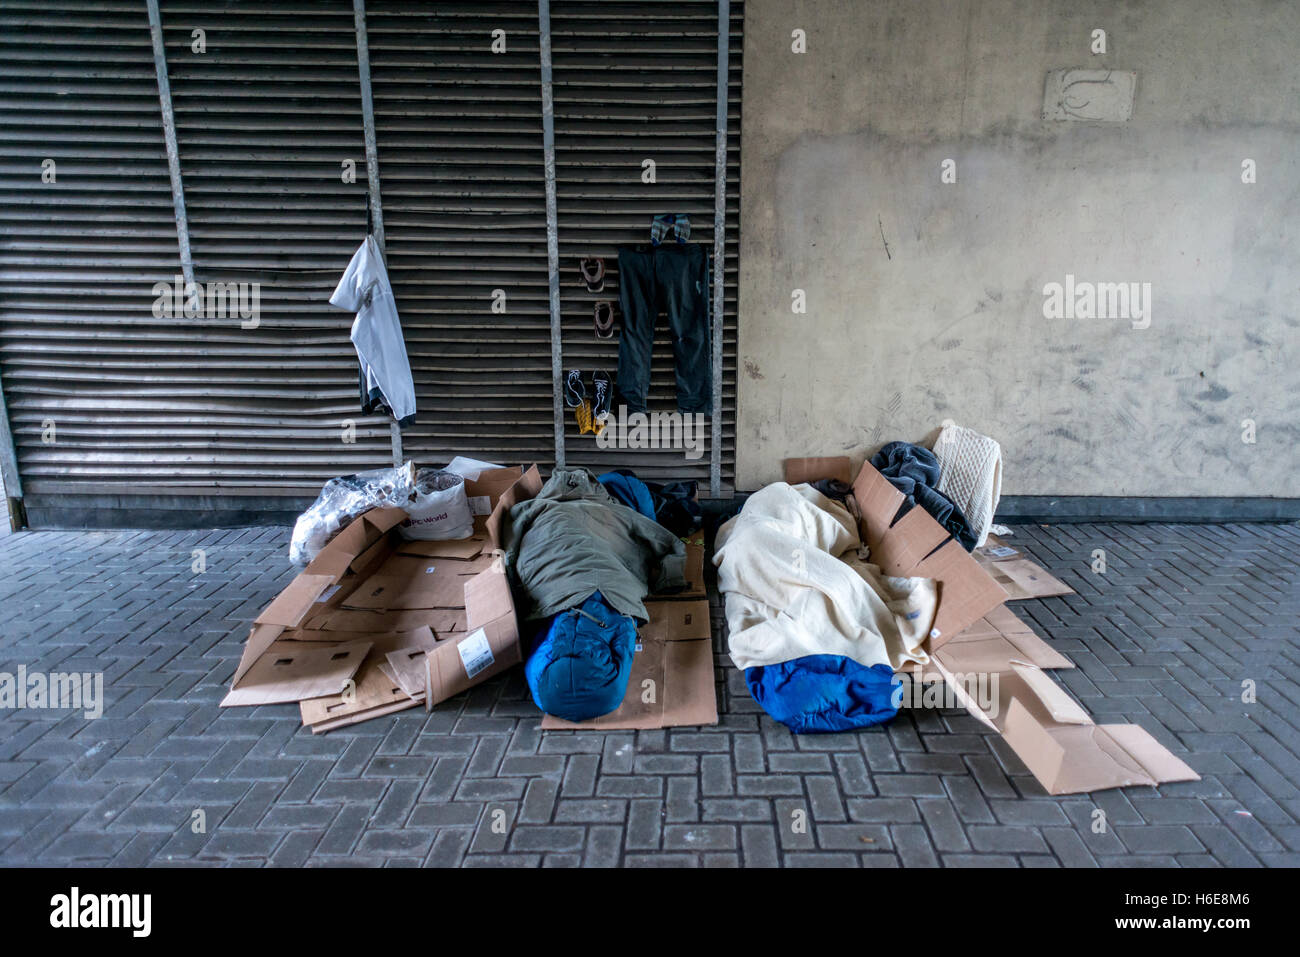 Homeless people asleep on the streets of Brighton. Stock Photo